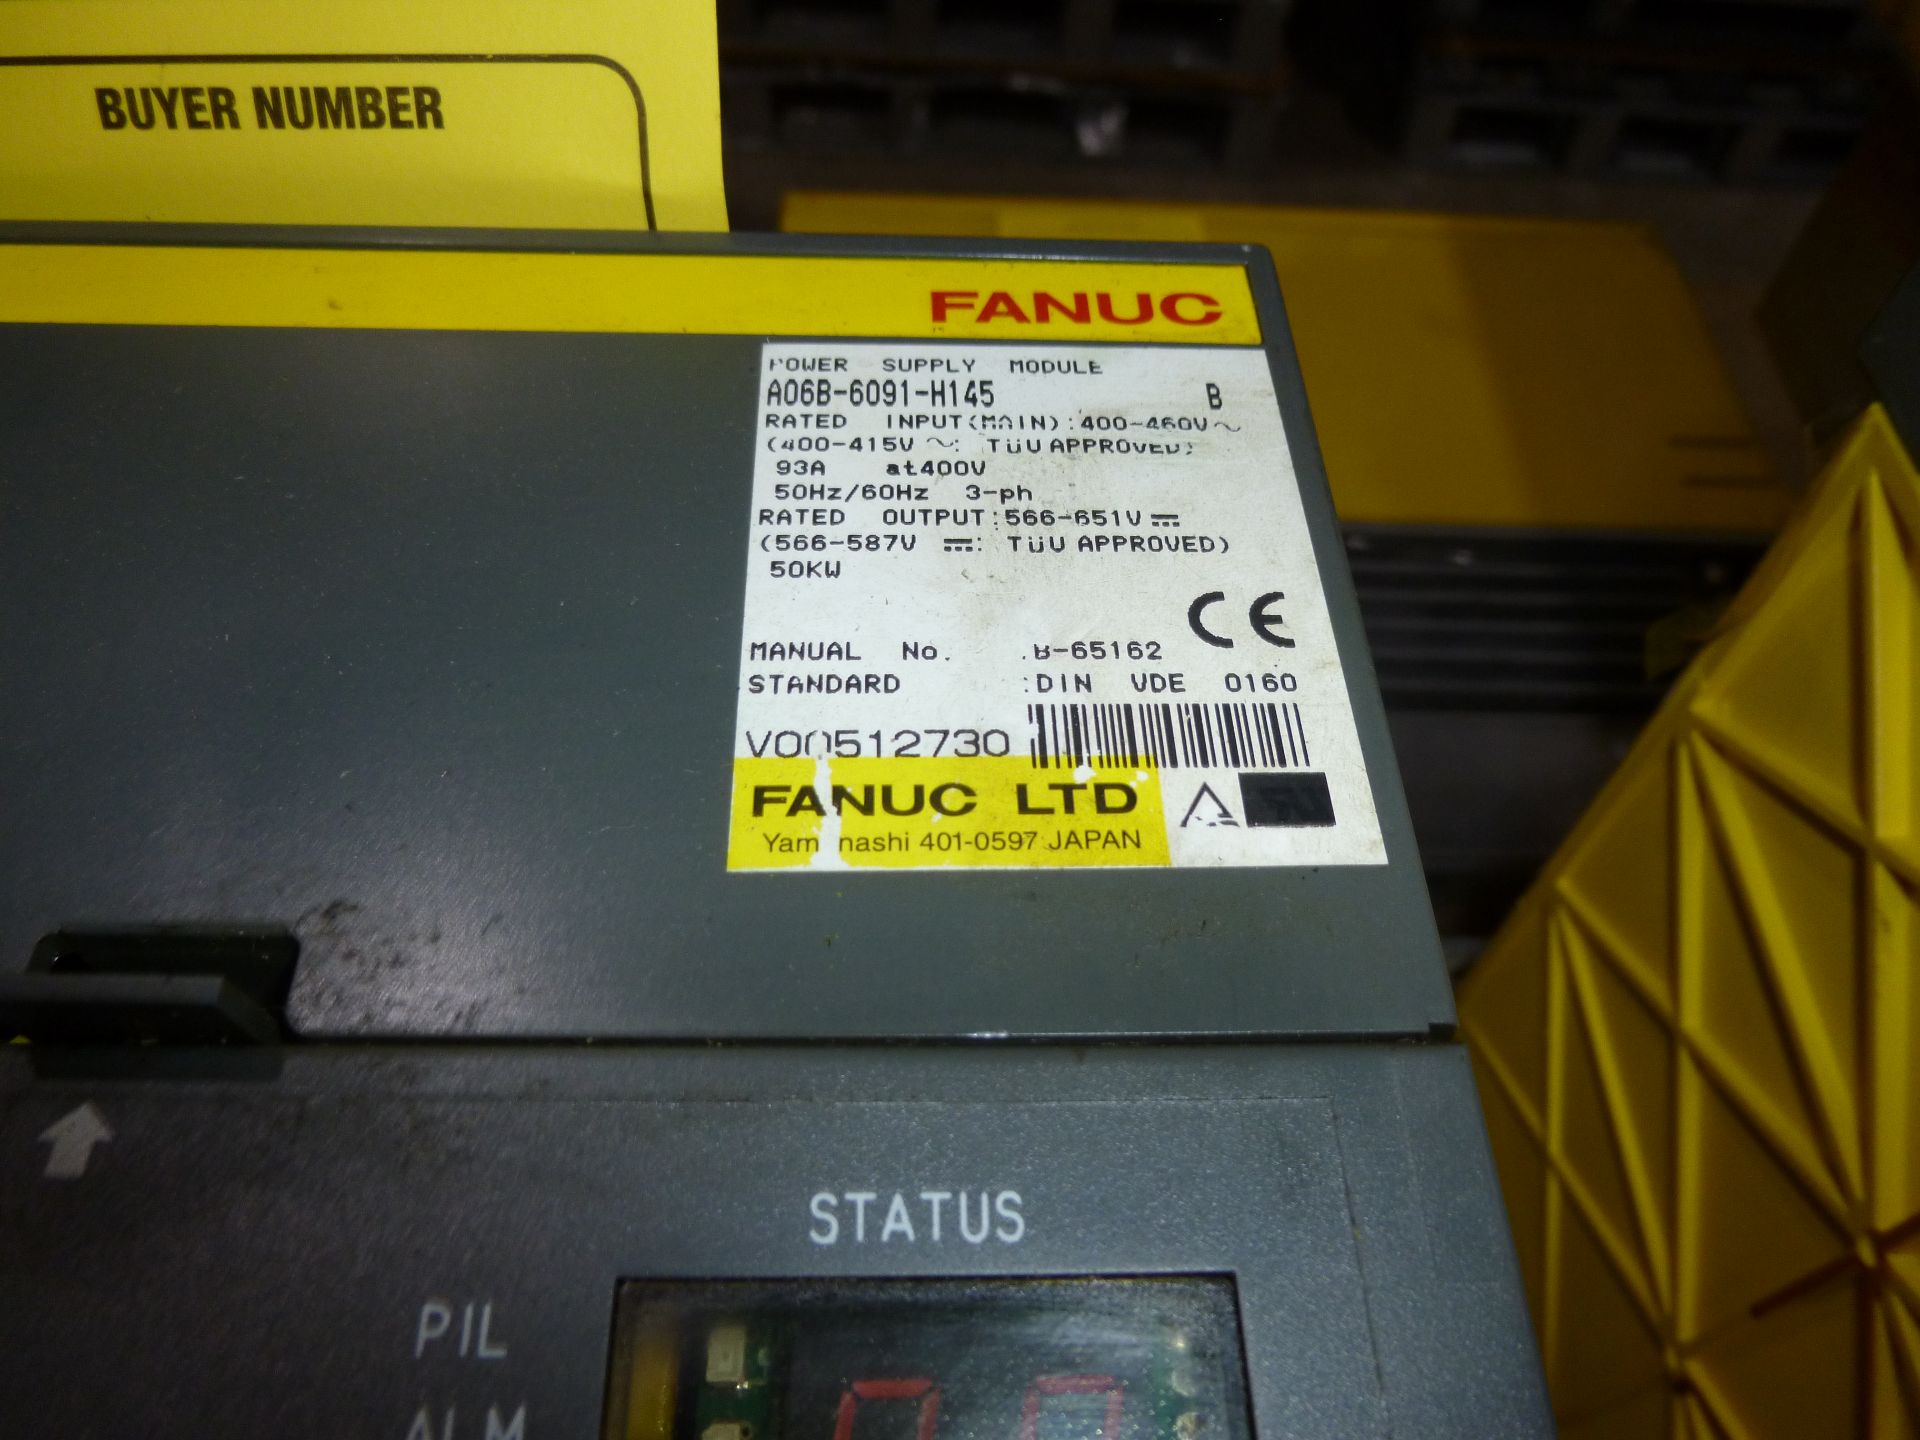 Fanuc power supply module model A06B-6091-H145, as always with Brolyn LLC auctions, all lots can - Image 2 of 2